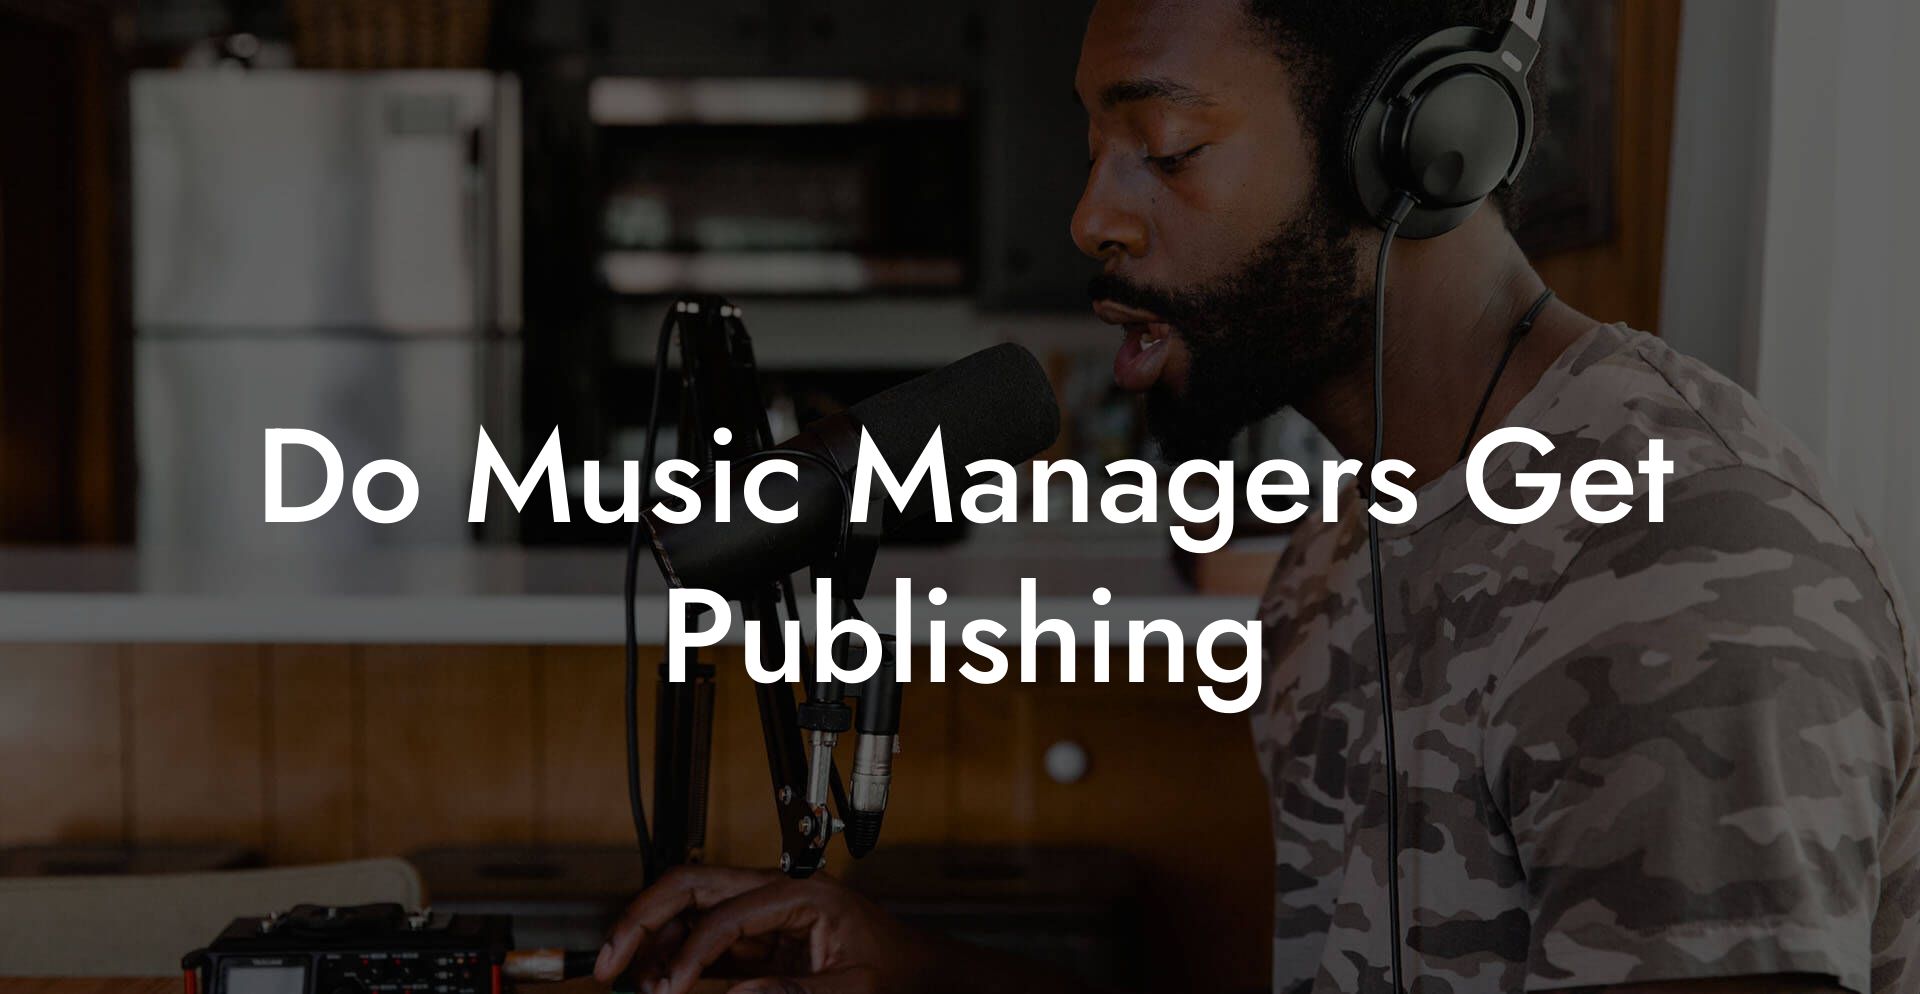 Do Music Managers Get Publishing